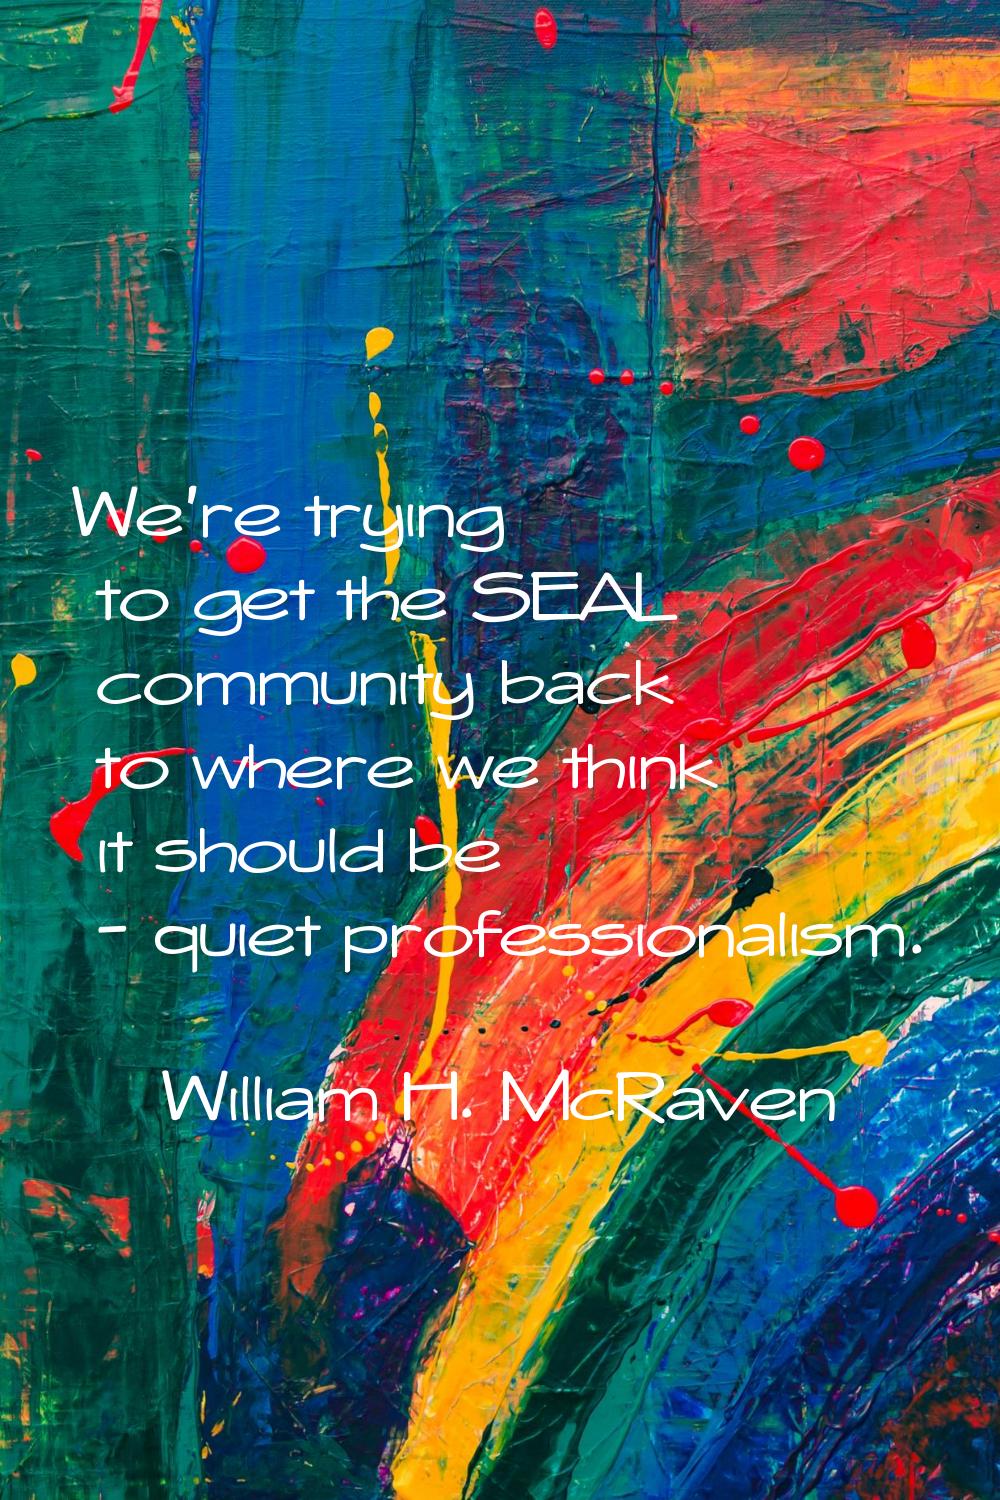 We're trying to get the SEAL community back to where we think it should be - quiet professionalism.